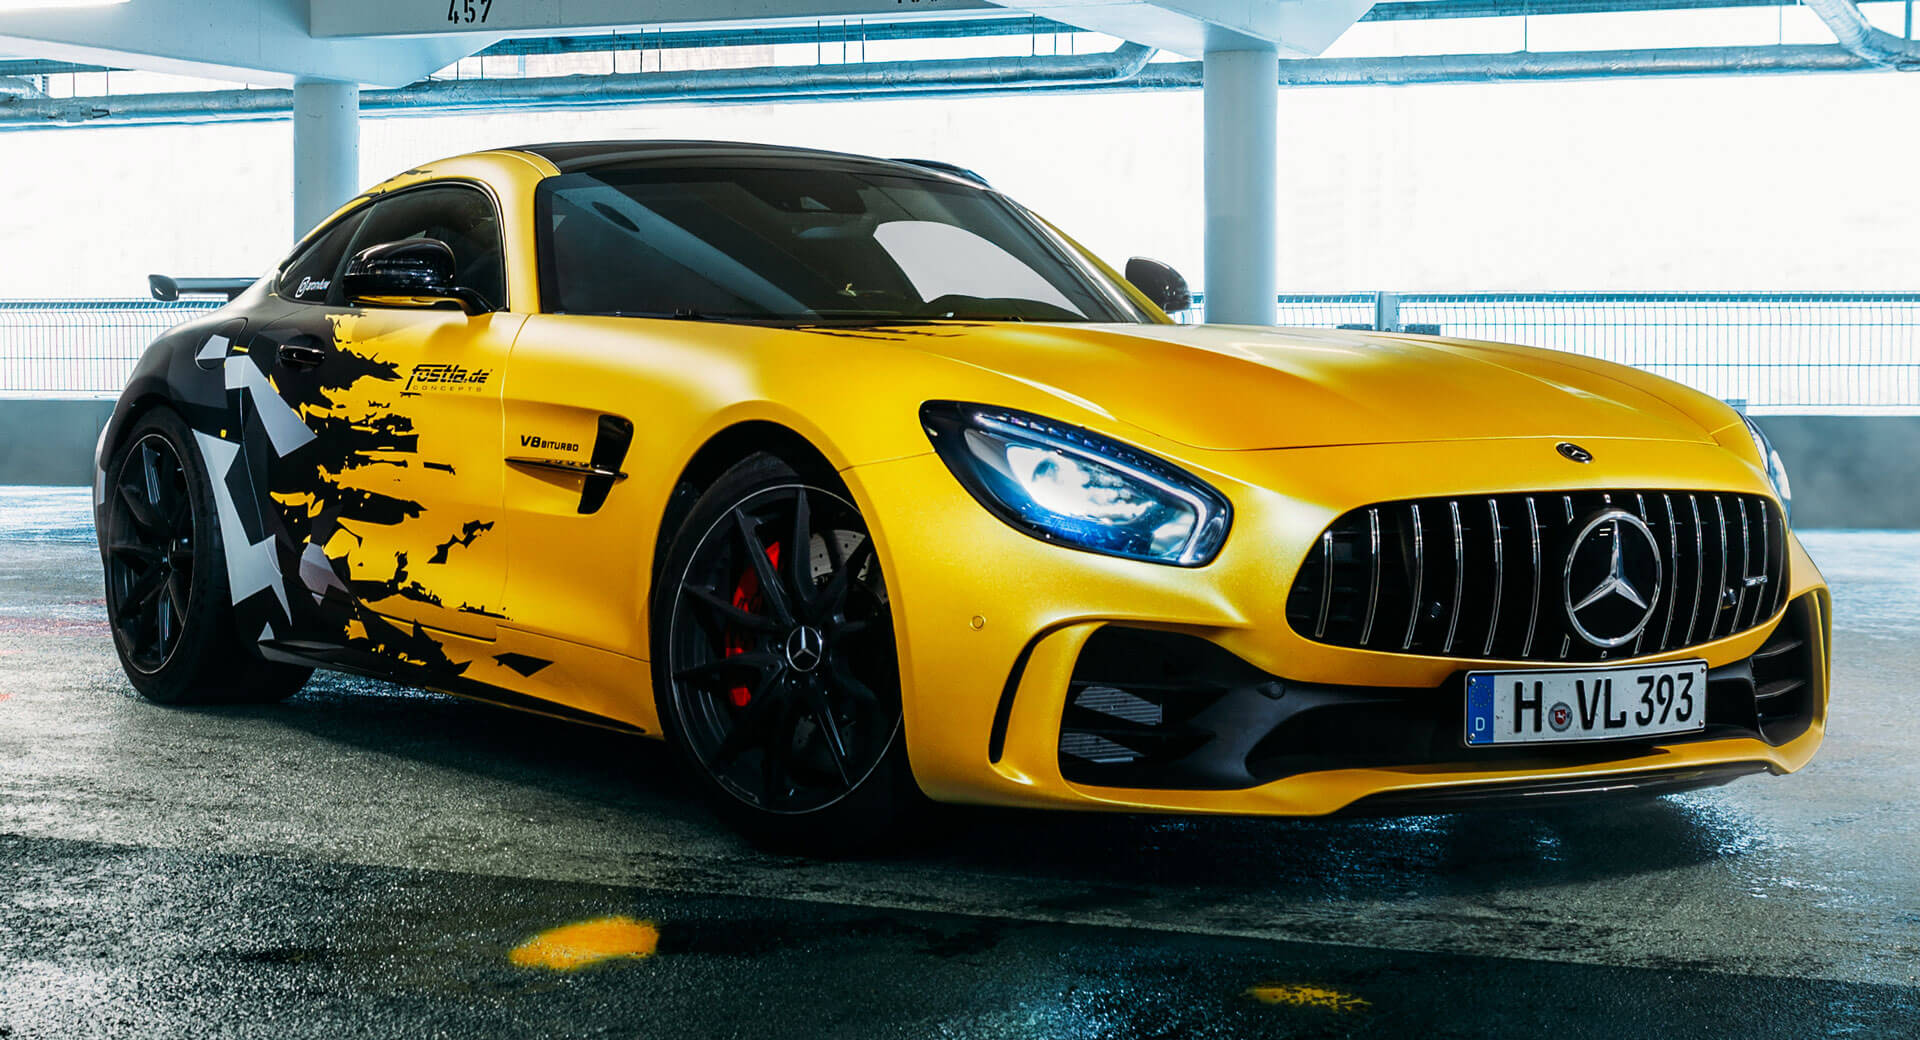 Fostla’s Mercedes-AMG GT R Gets 641 HP, Urban-Camo-And-Yellow Wrap | Carscoops1920 x 1040